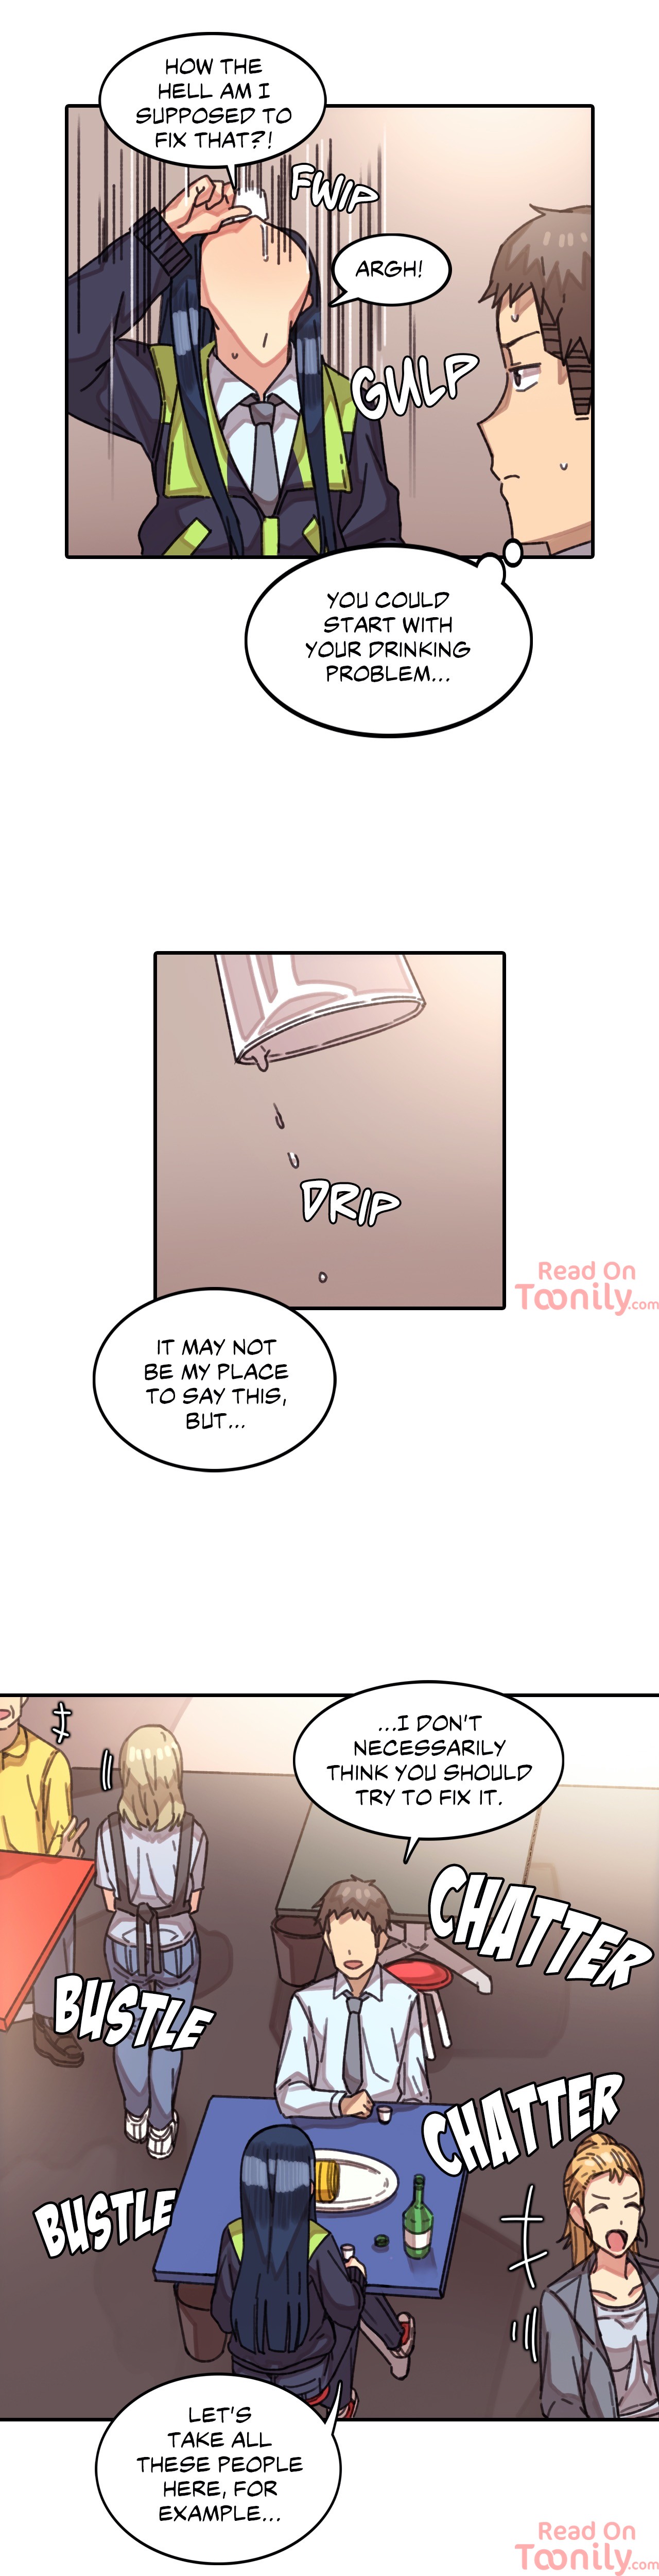 The Girl That Lingers in the Wall - Chapter 7 Page 6